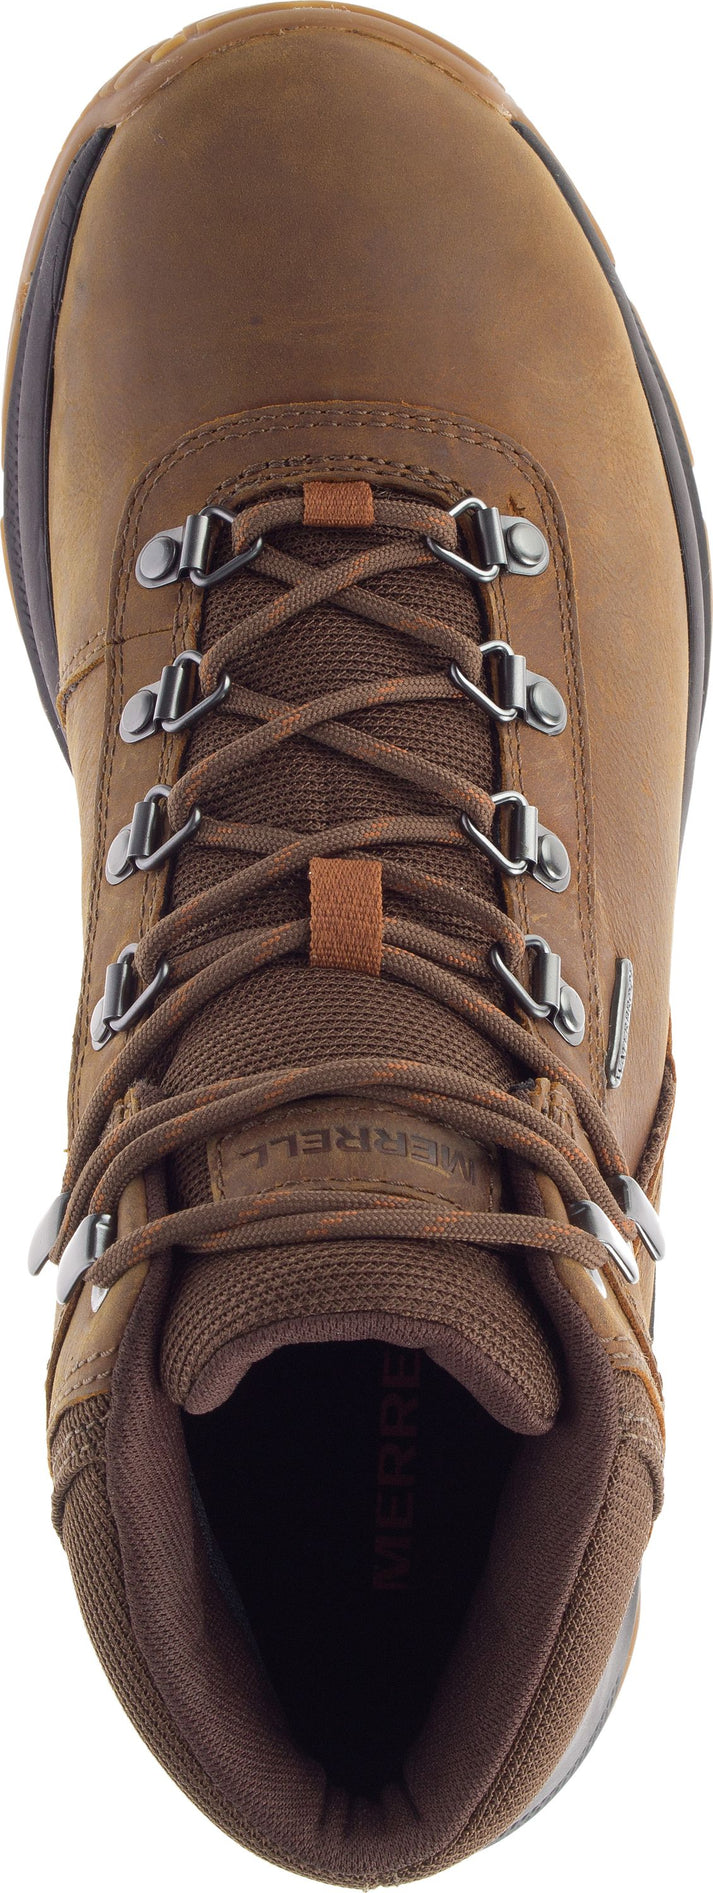 Merrell Boots Erie Mid Leather Waterproof Toffee